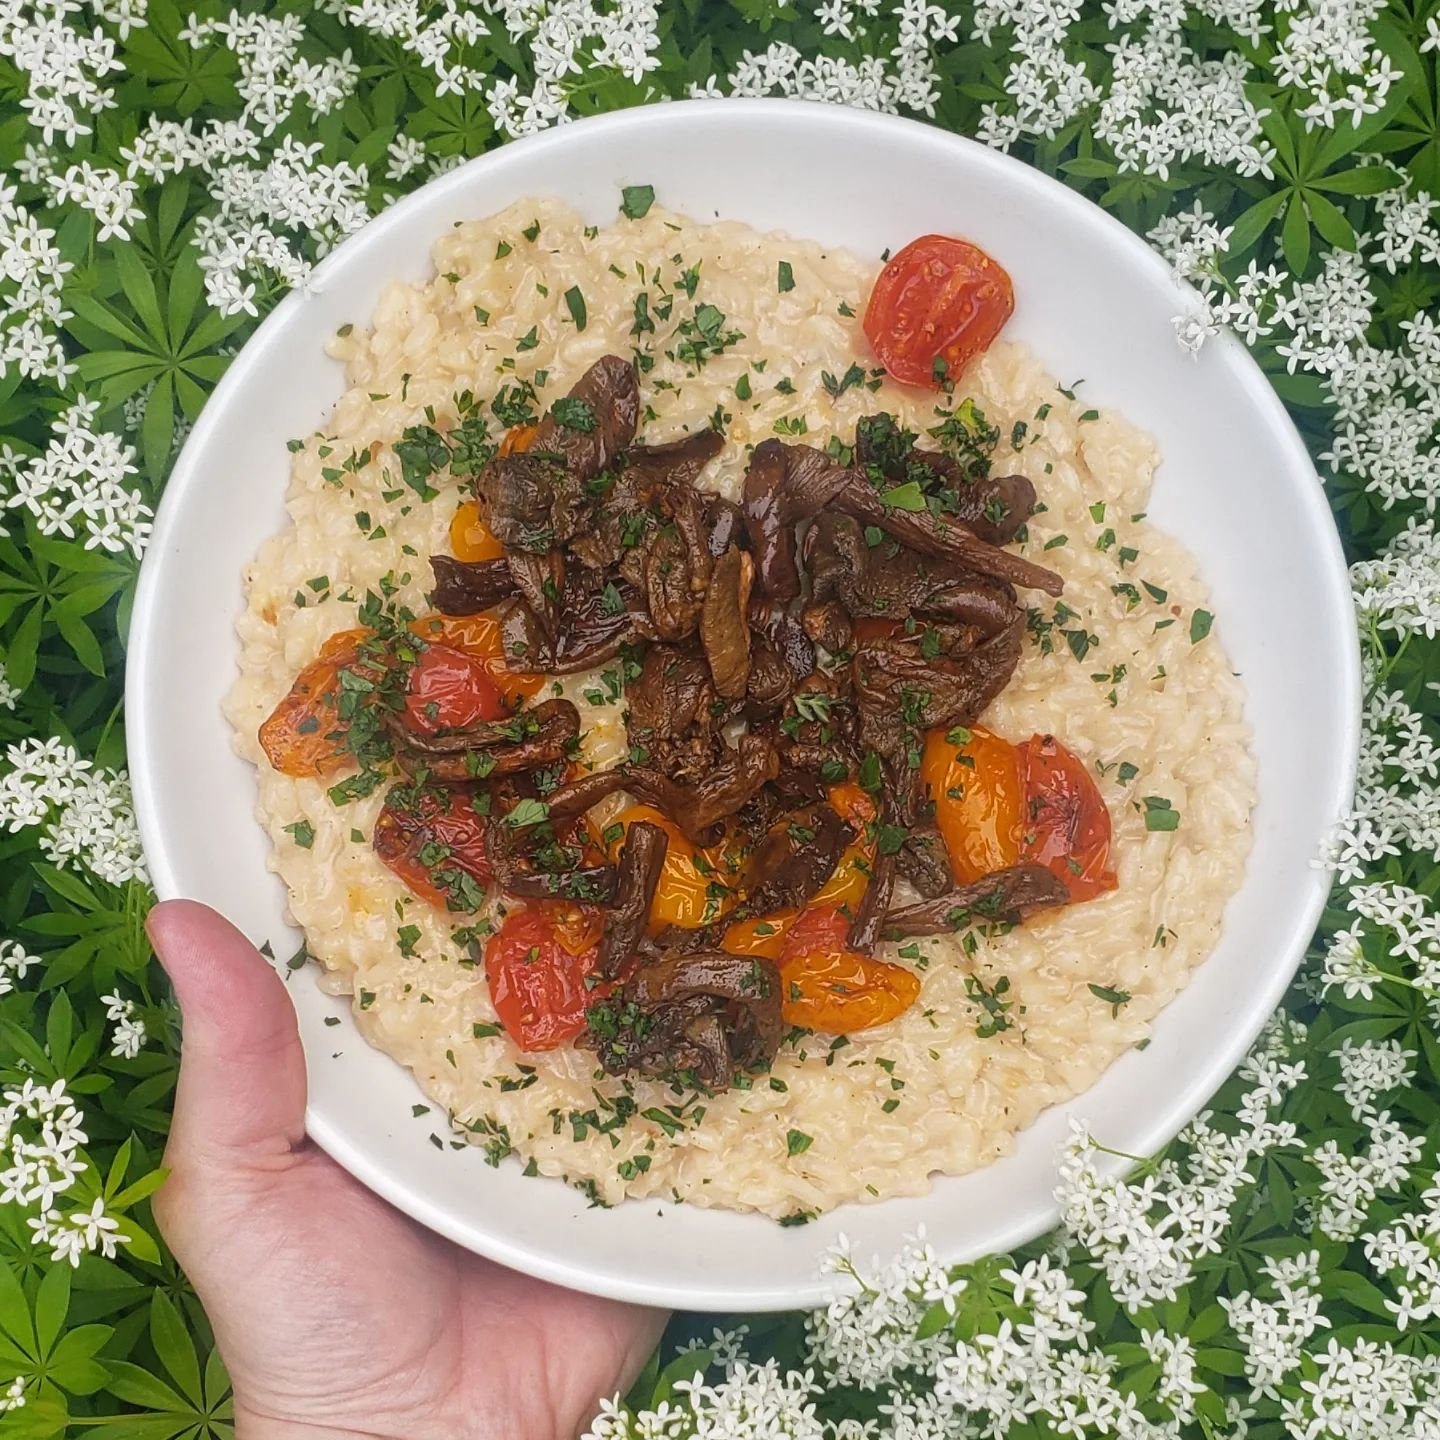 Sneak peak at our Mother's Day Specials Menu! 

Jereme and Ryan created a lovely Mushroom and Blistered Tomato Risotto as our vegetarian Entr&eacute;e. 

Pics of our featured cocktails, Surf &amp; Turf, and more coming soon! Specials will run this Sa